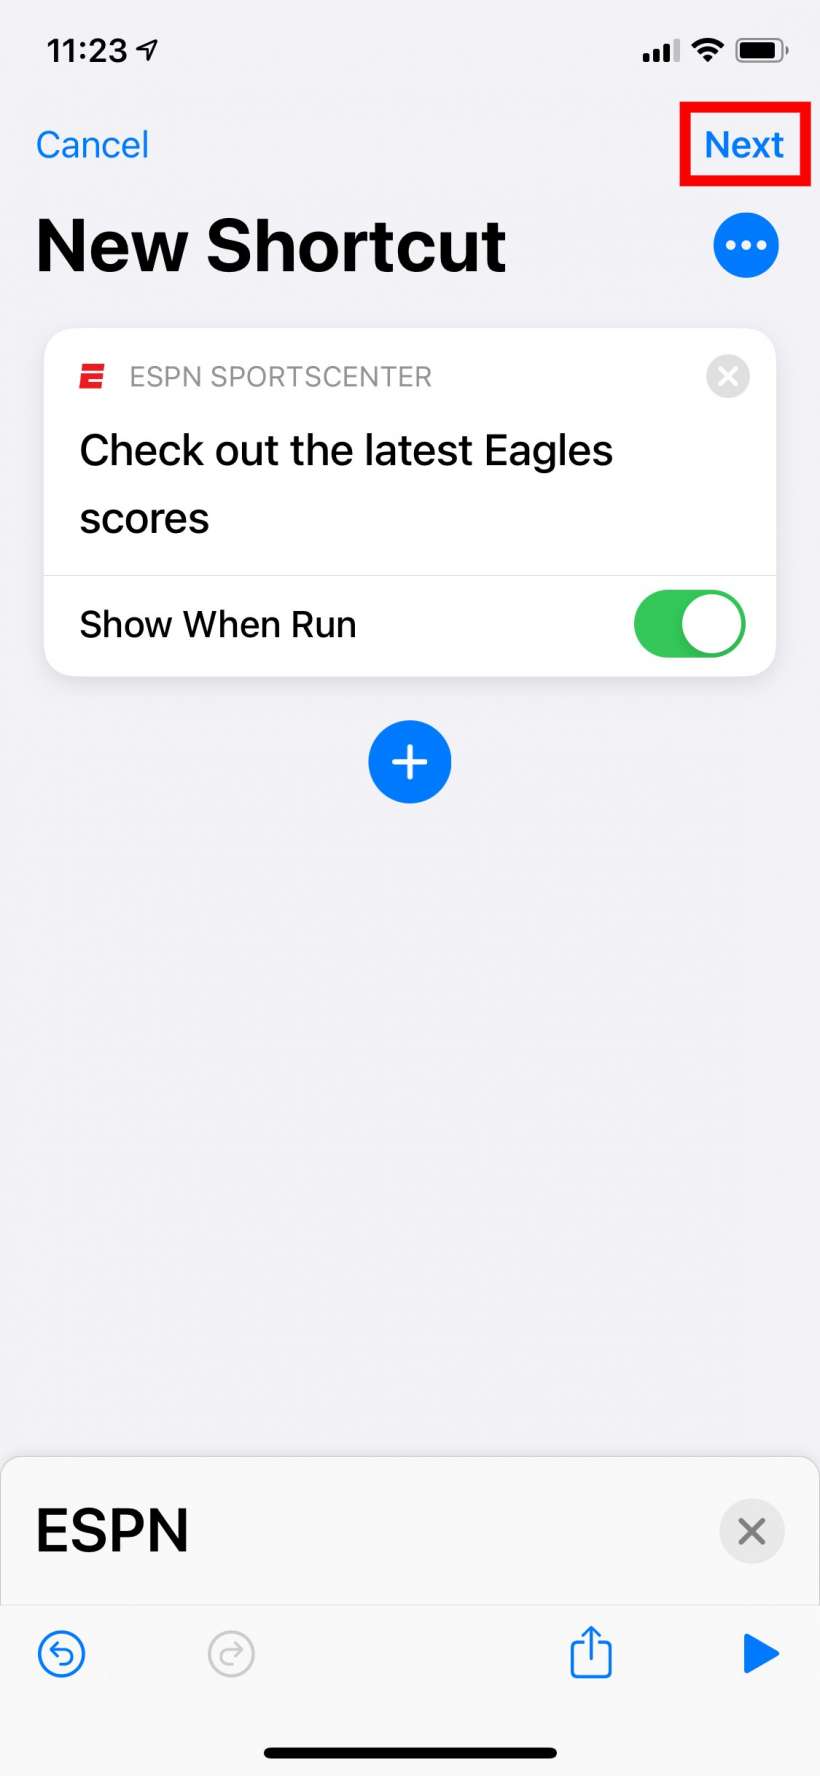 How to quickly check your favorite team's game score with Back Tap on iPhone.